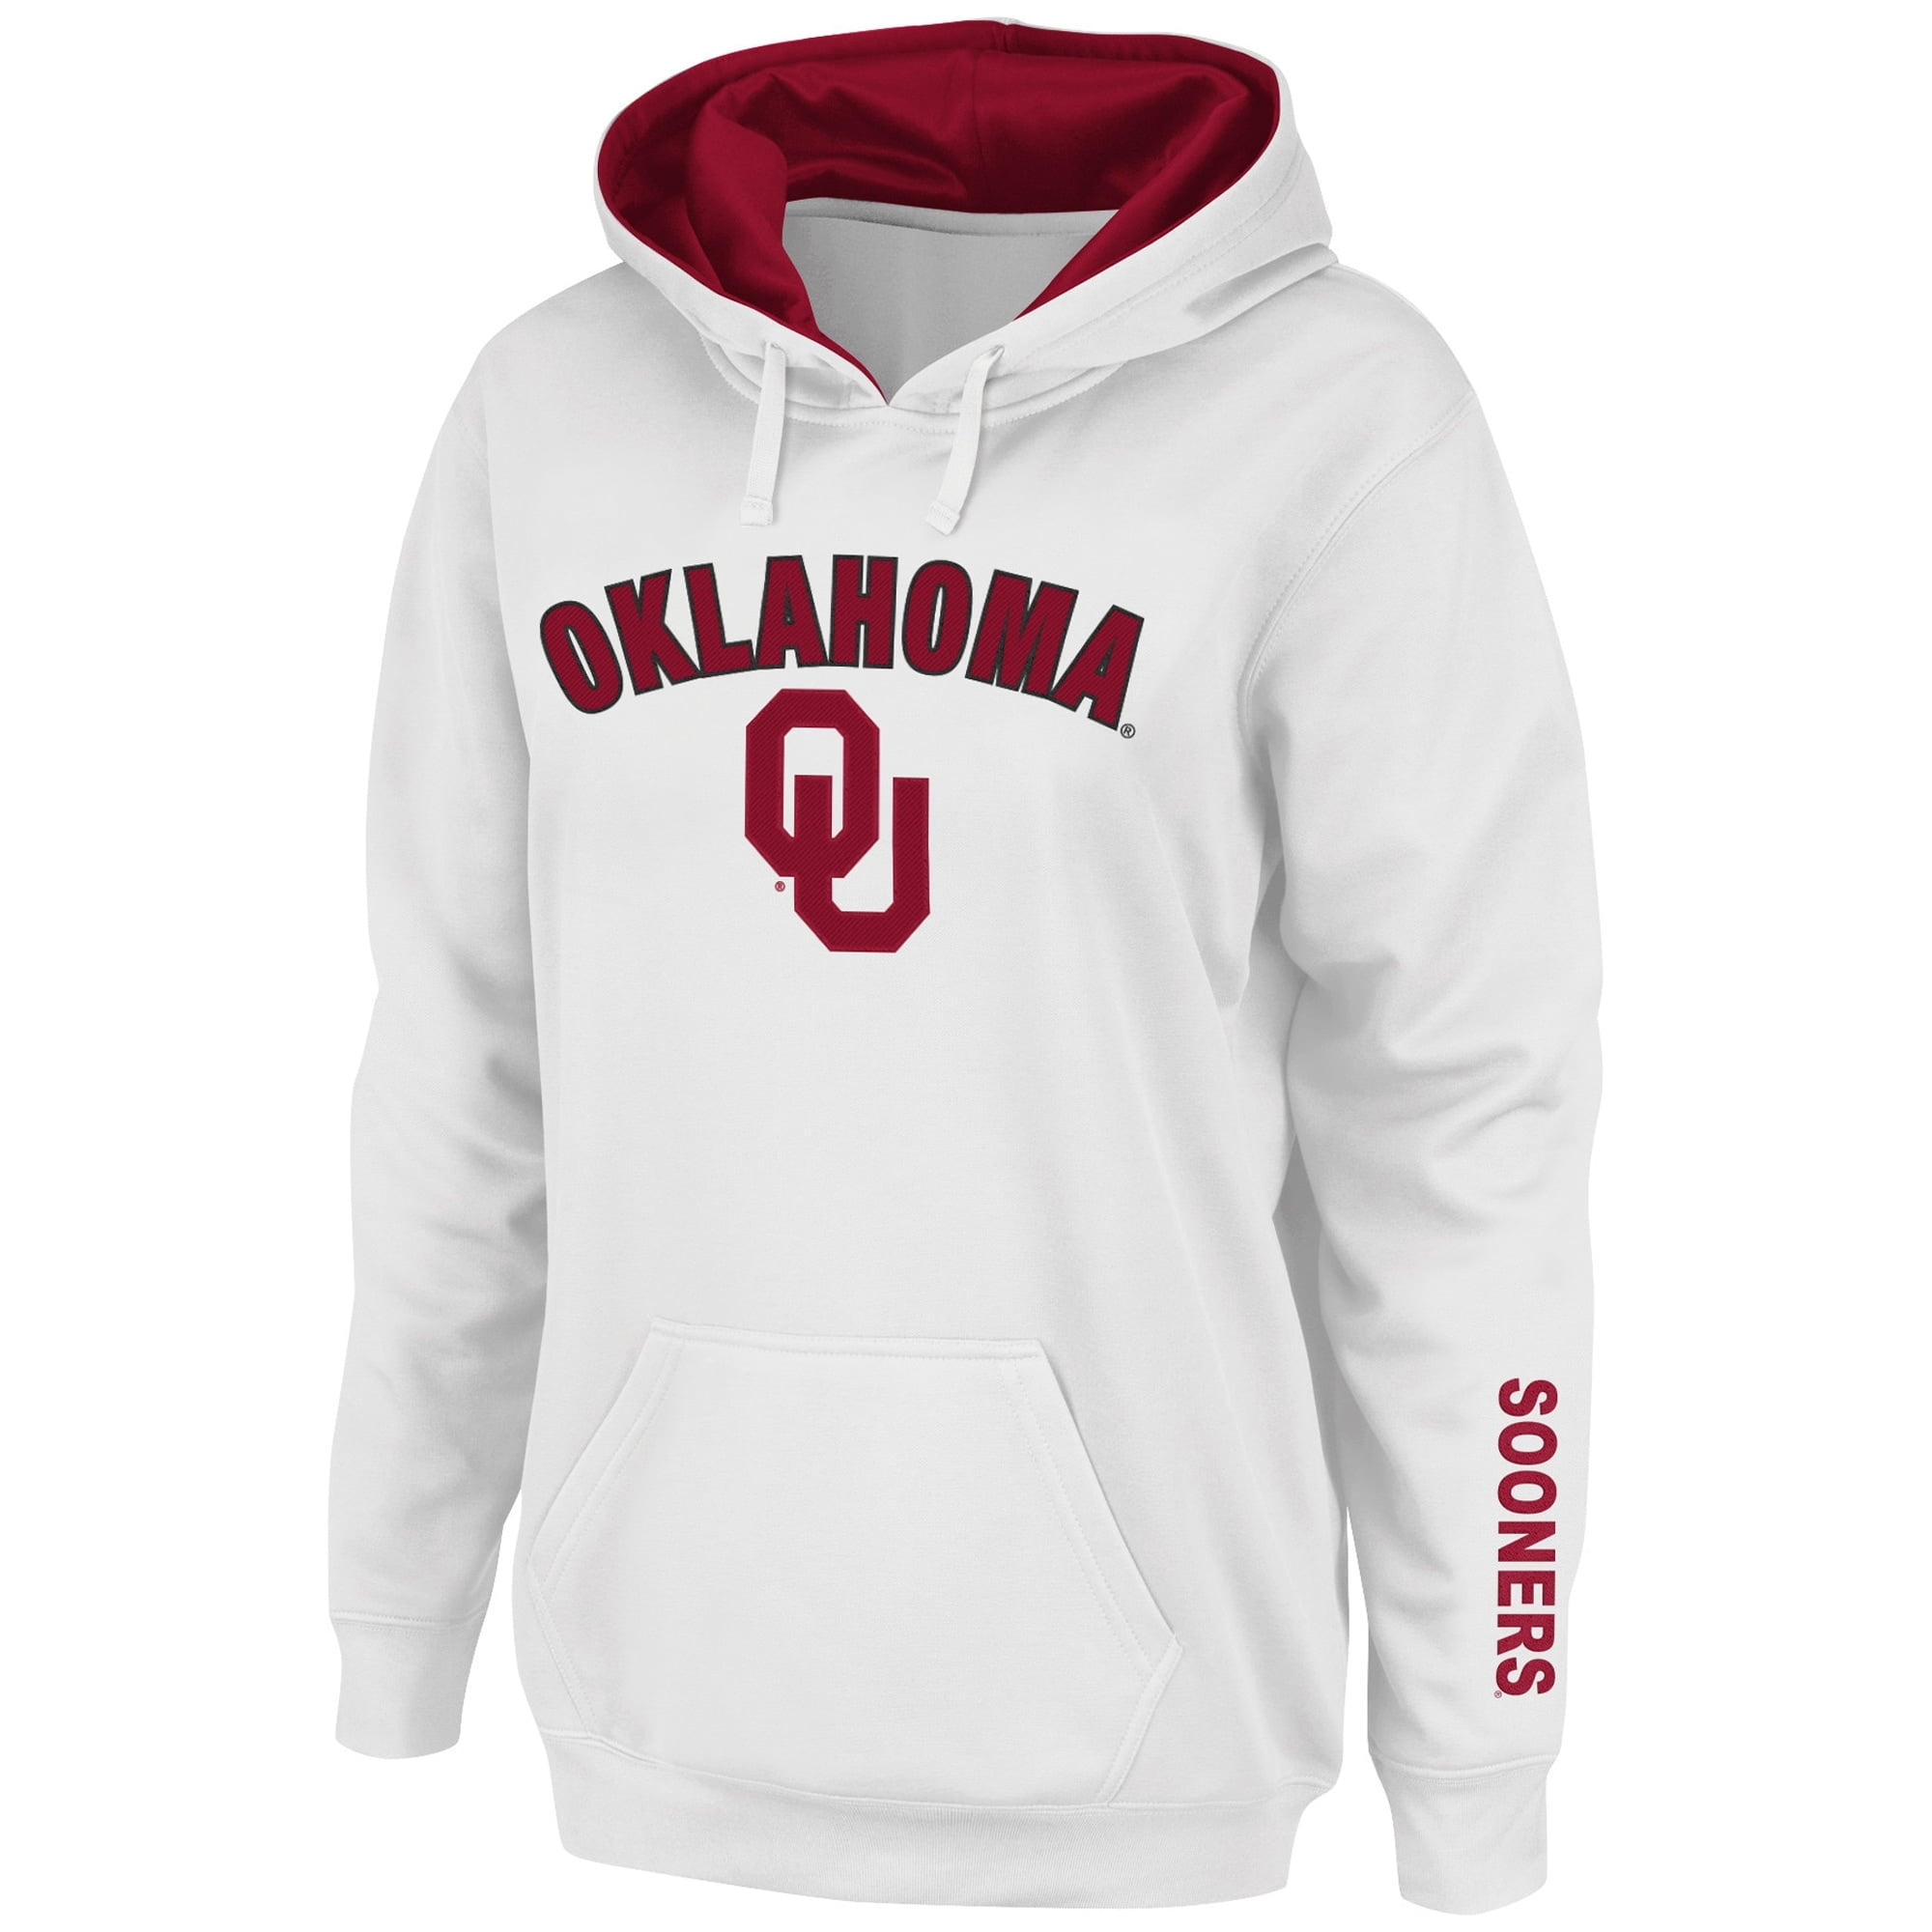 Oklahoma Sooners Women's Arch & Logo 1 Pullover Hoodie - White ...